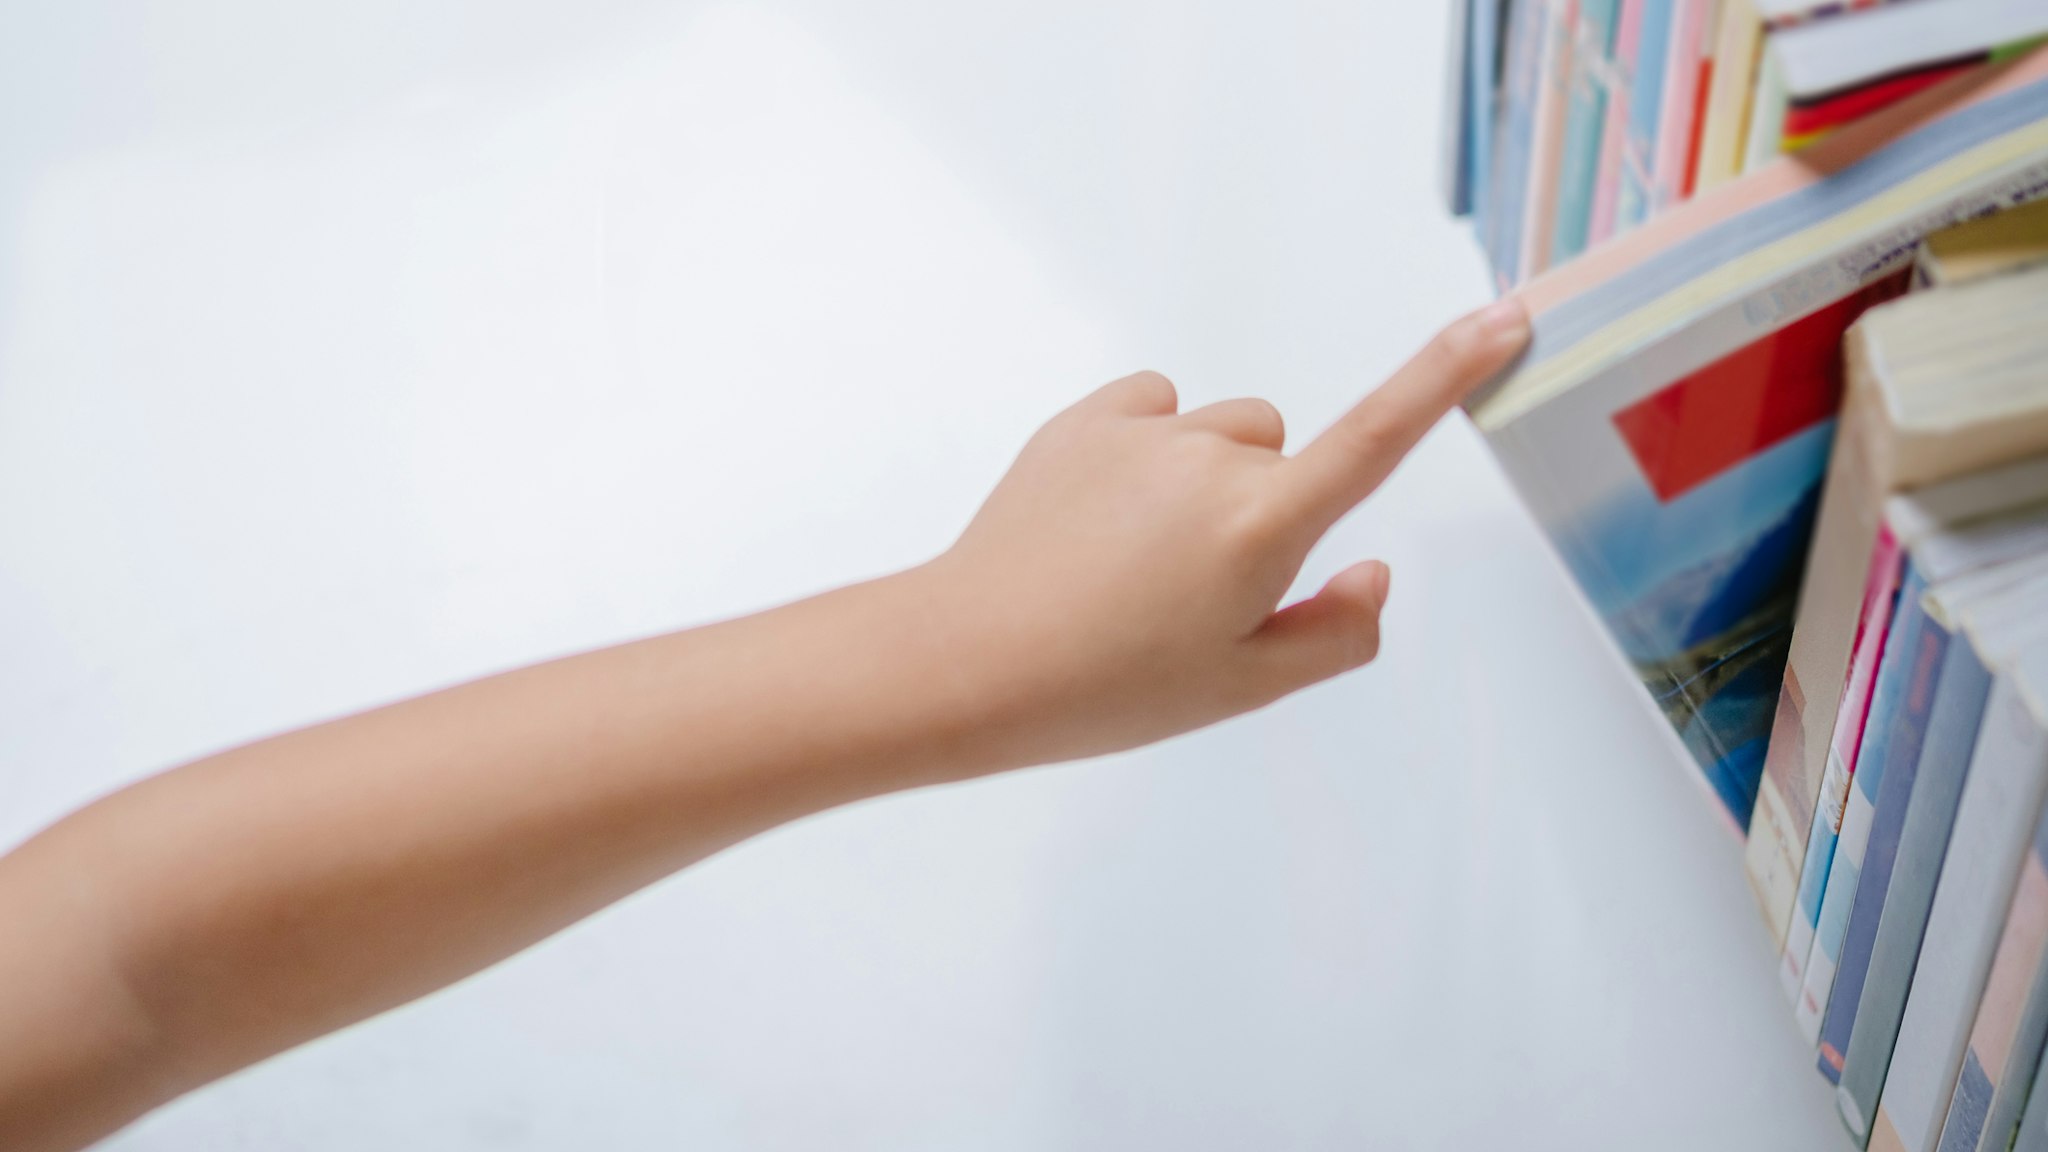 Child reaching for book